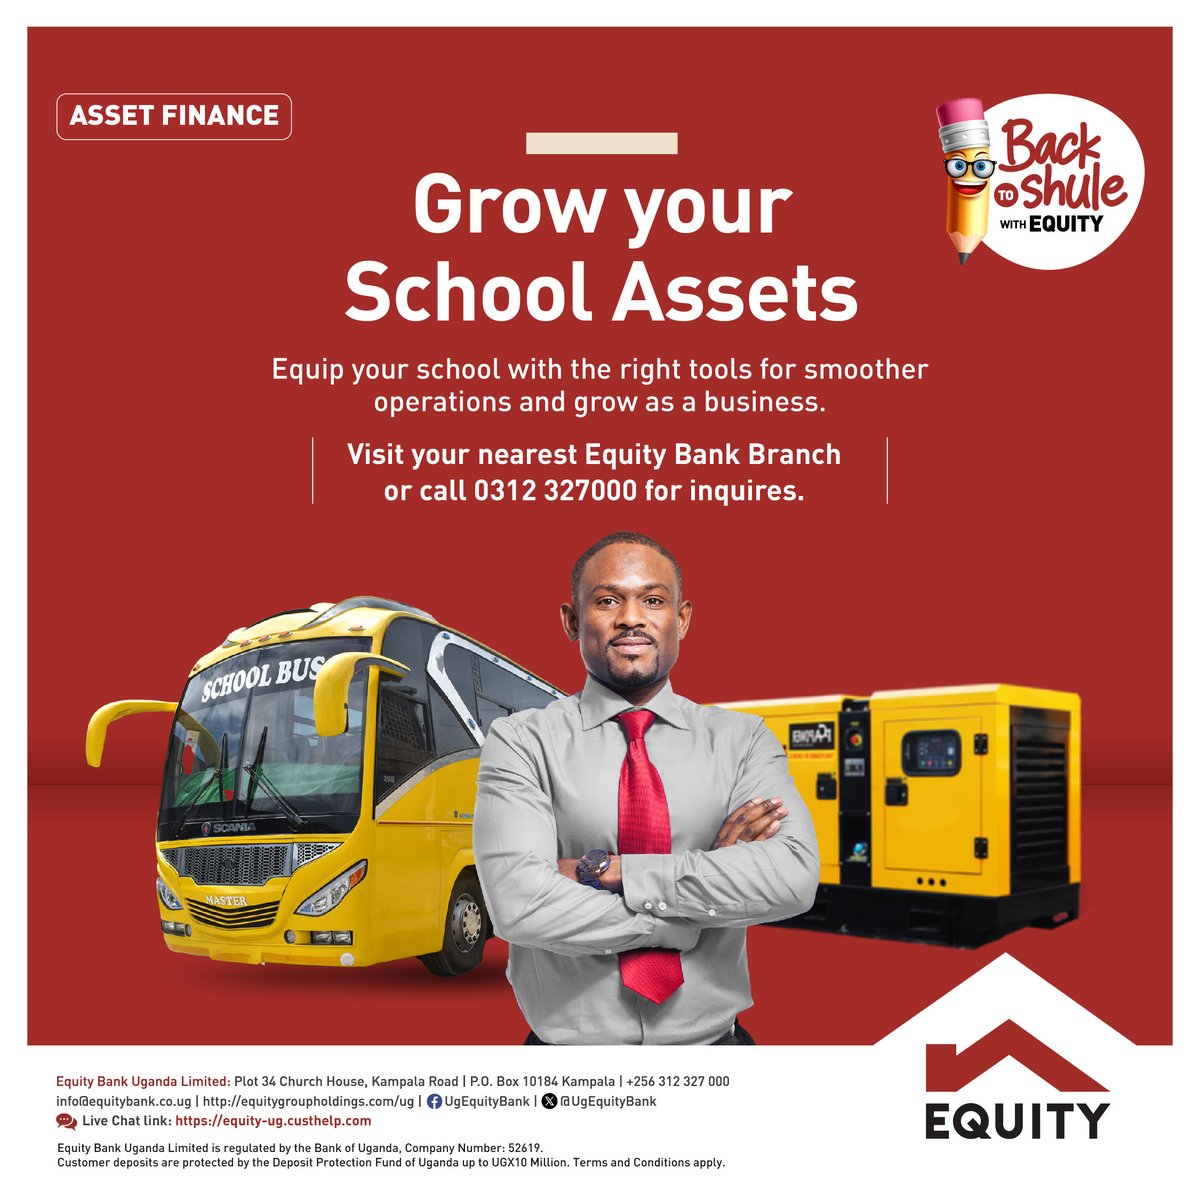 Grow your school assets and take your business to the next level with our asset financing loan product tailored to meet your financial needs. #BackToShuleWithEquity #EquityBankUganda